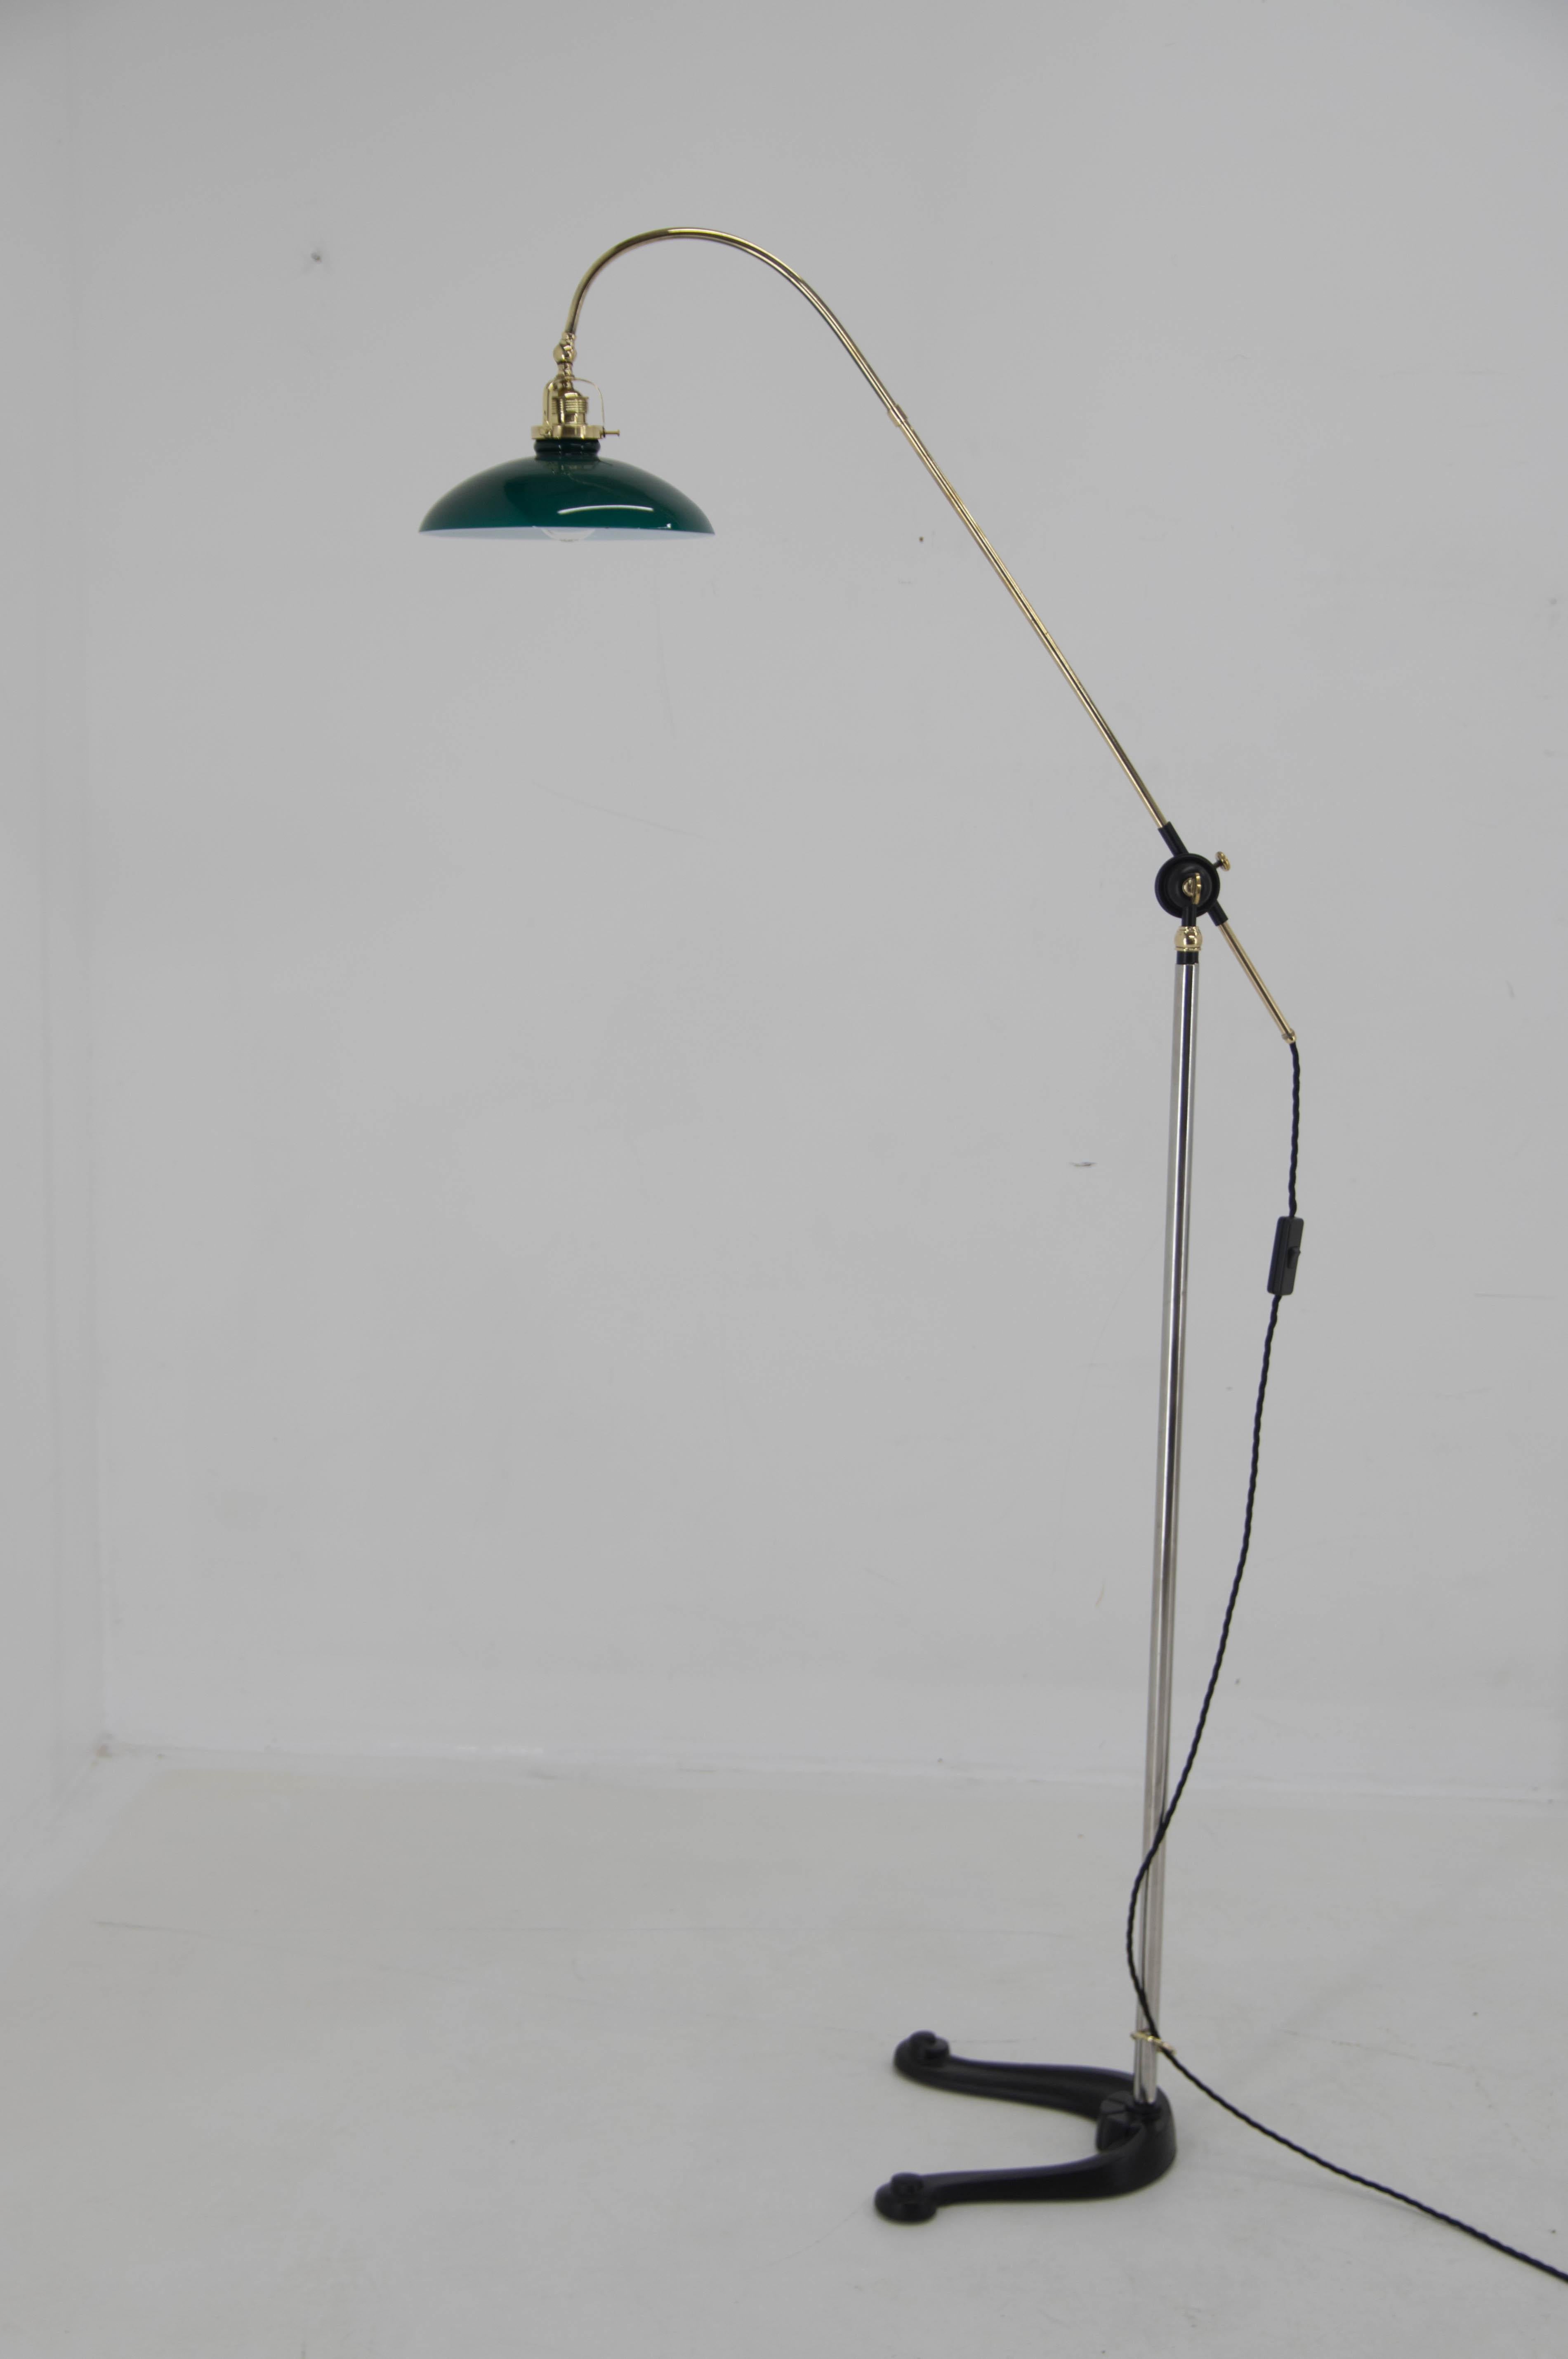 Art Deco floor lamp with adjustable arm and shade.
Made in Denmark in 1940s.
Completely restored, refinished, rewired.
1x40W, E25-E27 bulb
US plug adapter included.